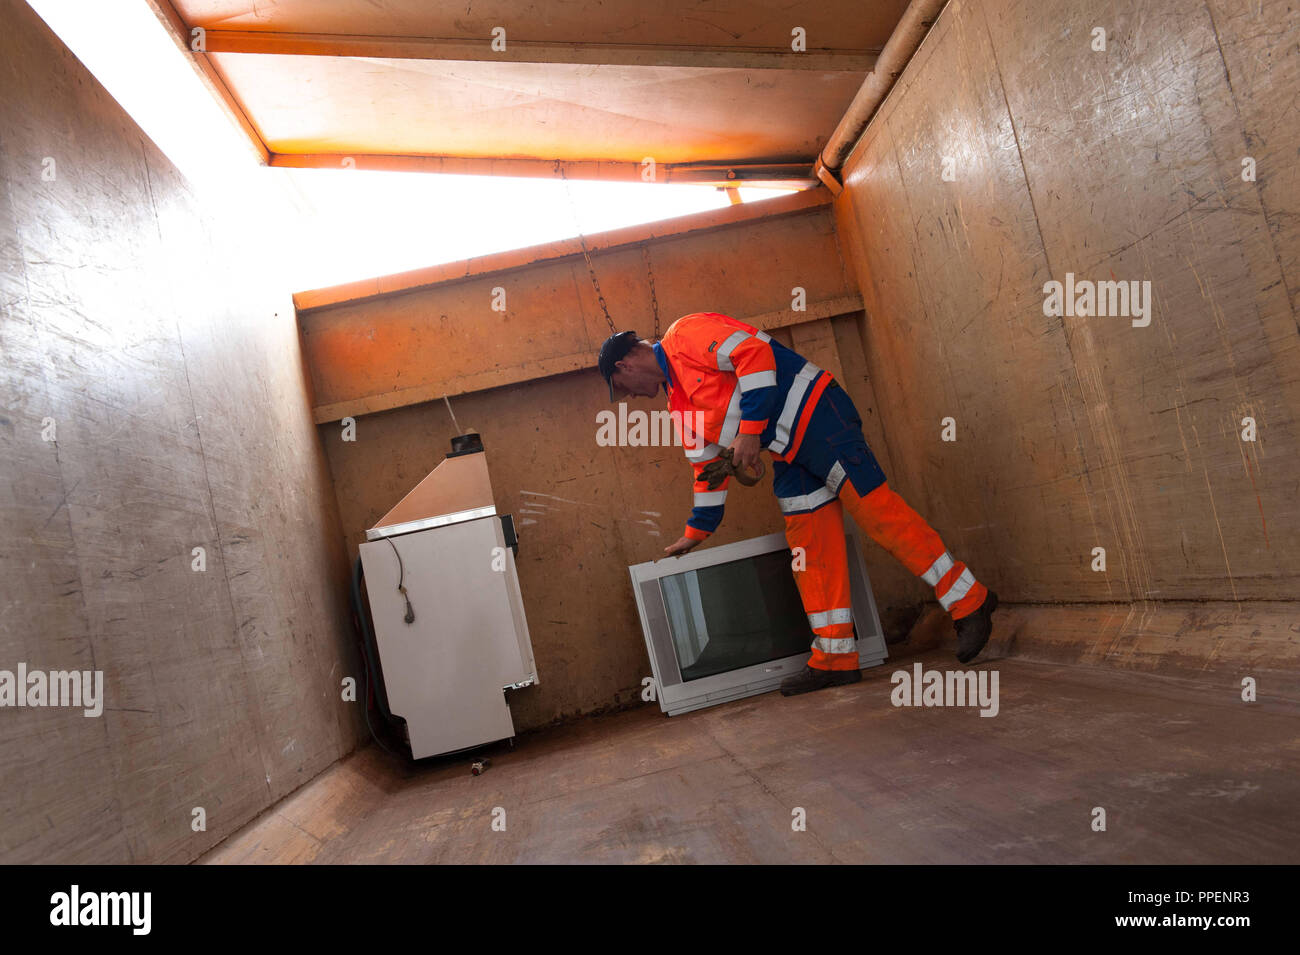 At the Graefelfing recycling depot there is a collection campaign of used, but still fully functional electronic devices for the flood victims in Deggendorf. Stock Photo